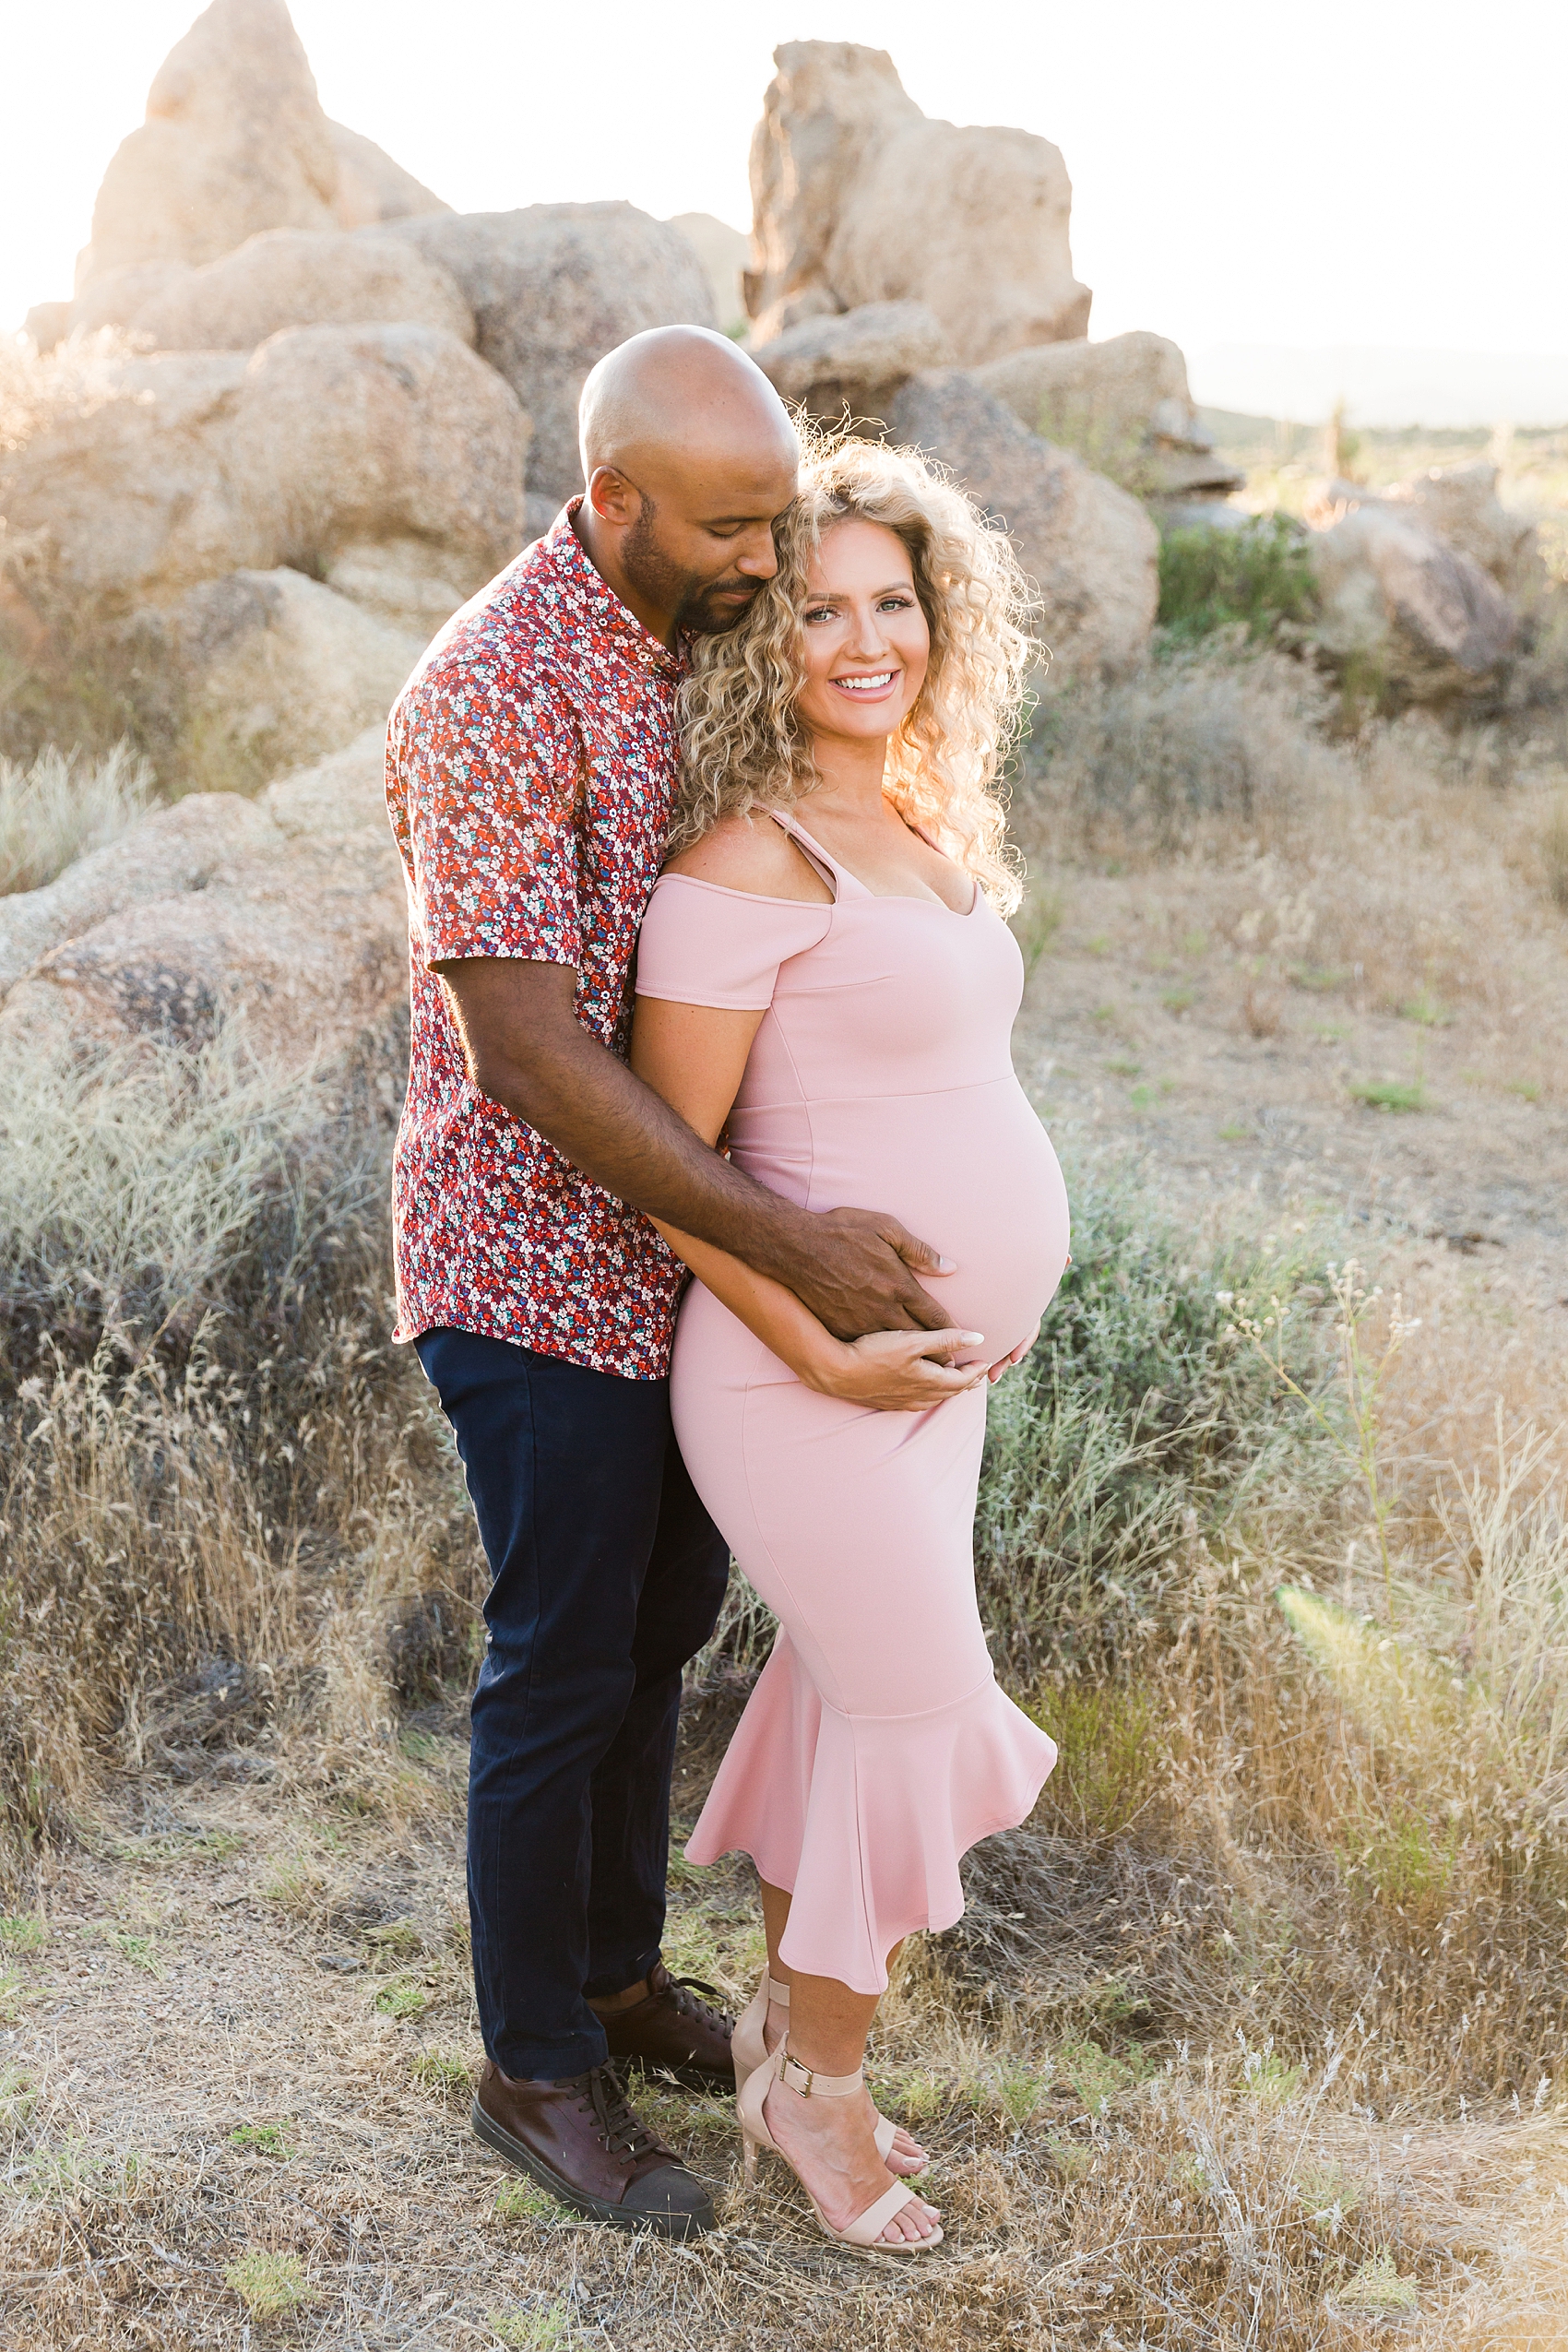 Leah Hope Photography | Scottsdale Phoenix Arizona | Desert Landscape Cactus Boulders Scenery | Sunset Natural Light | What to Wear | How to Pose | Maternity Poses | Styling Fashion for Pictures | Maternity Photos | Bump Pictures | Pregnancy Photos | Baby Bump